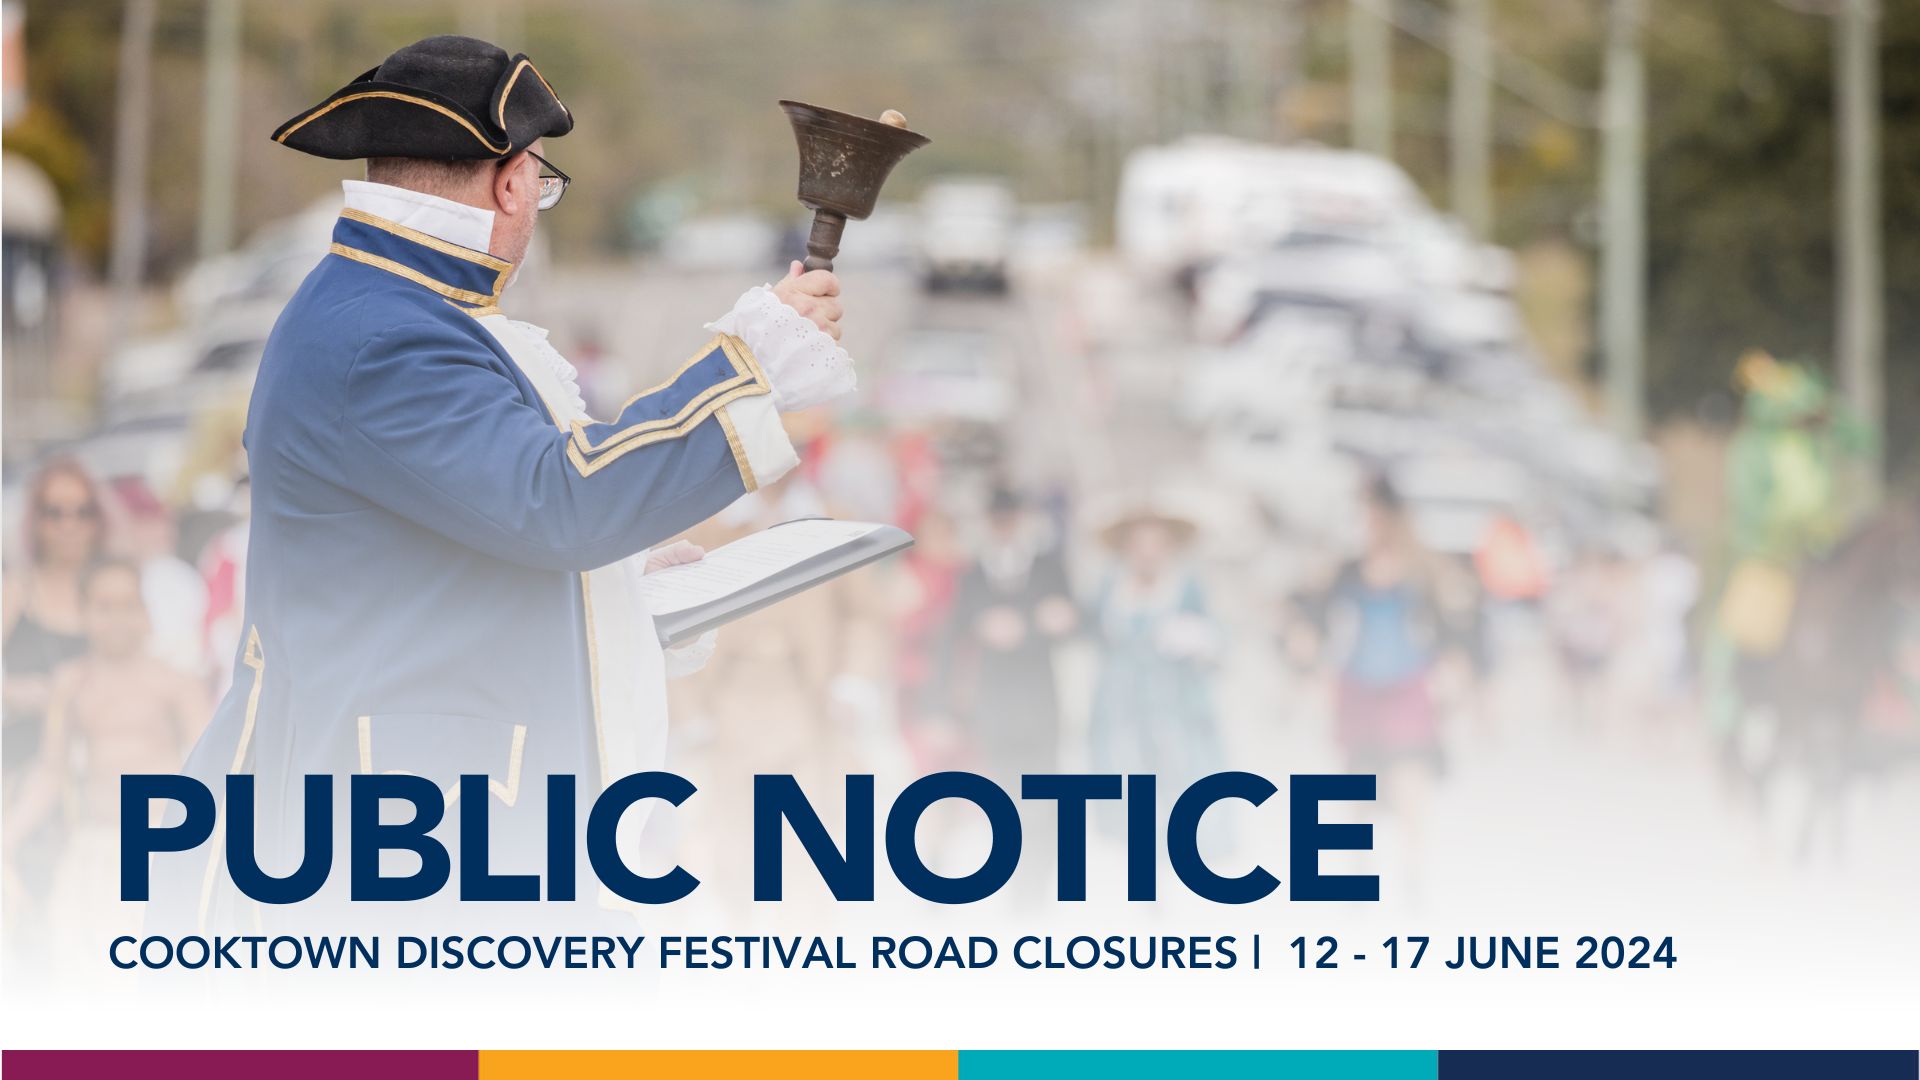 DISCOVERY FESTIVAL ROAD CLOSURES | JUNE 2024